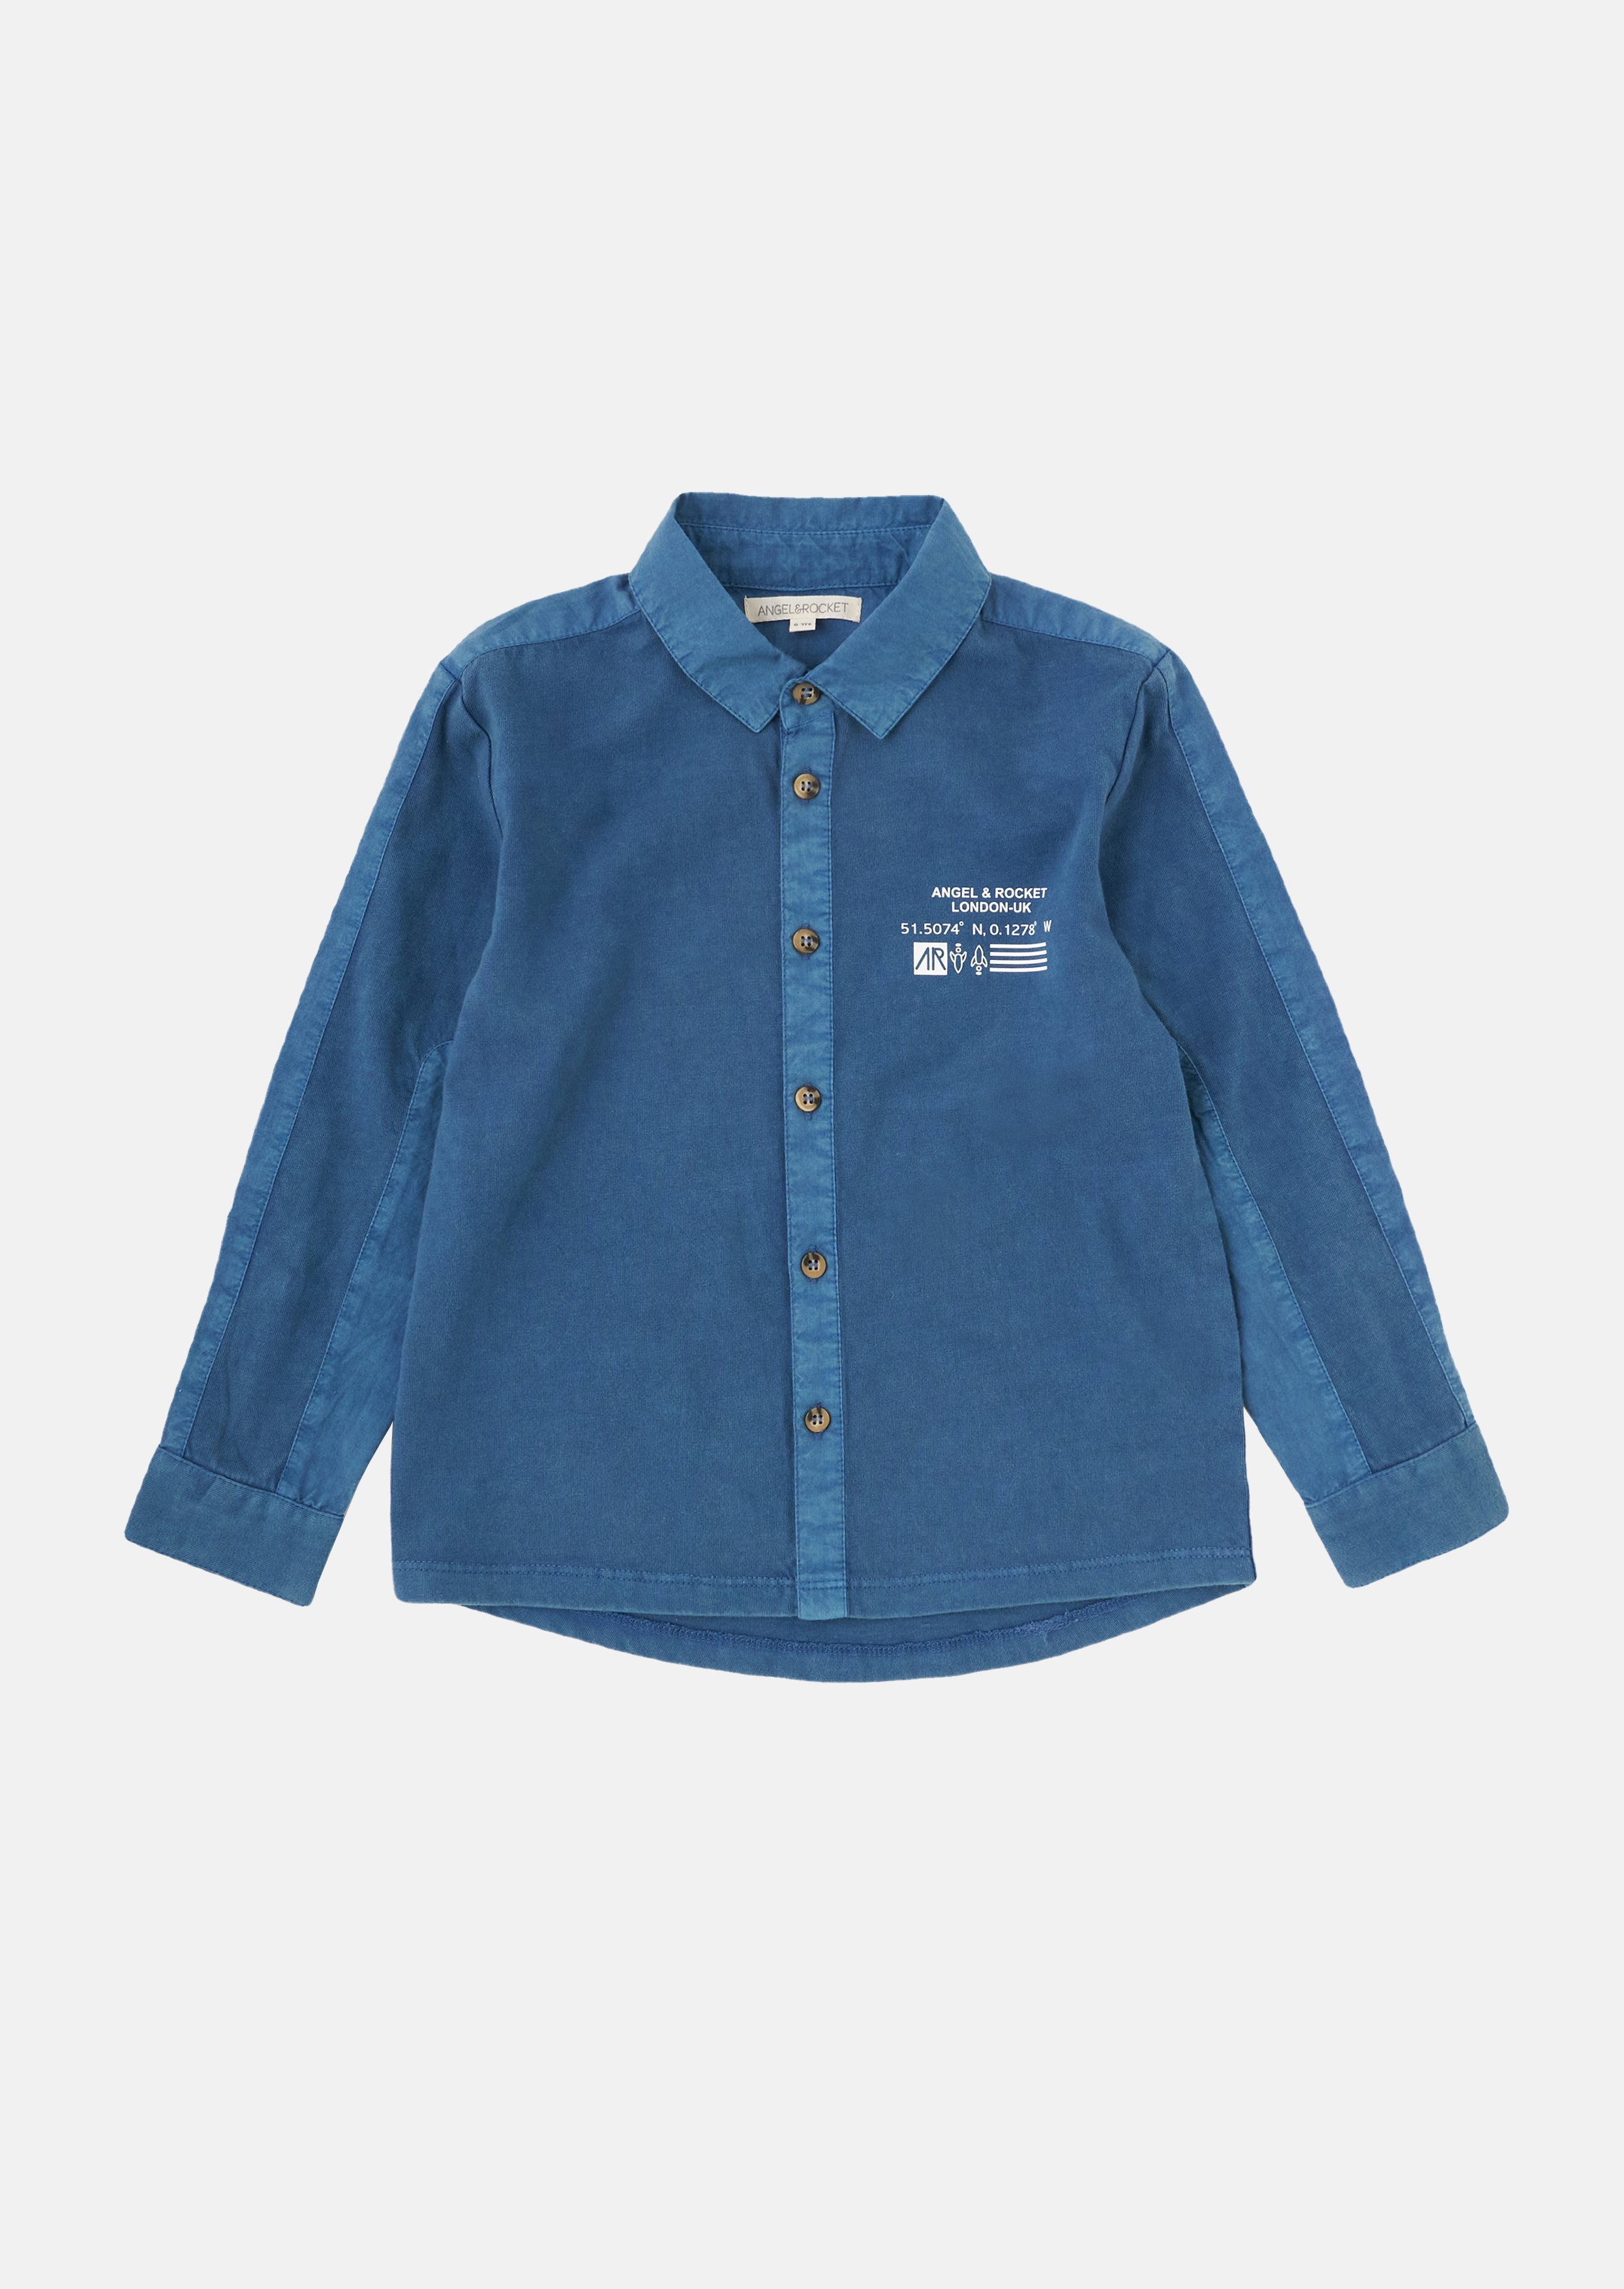 Boys Solid Blue Full Sleeves Cotton Shirt